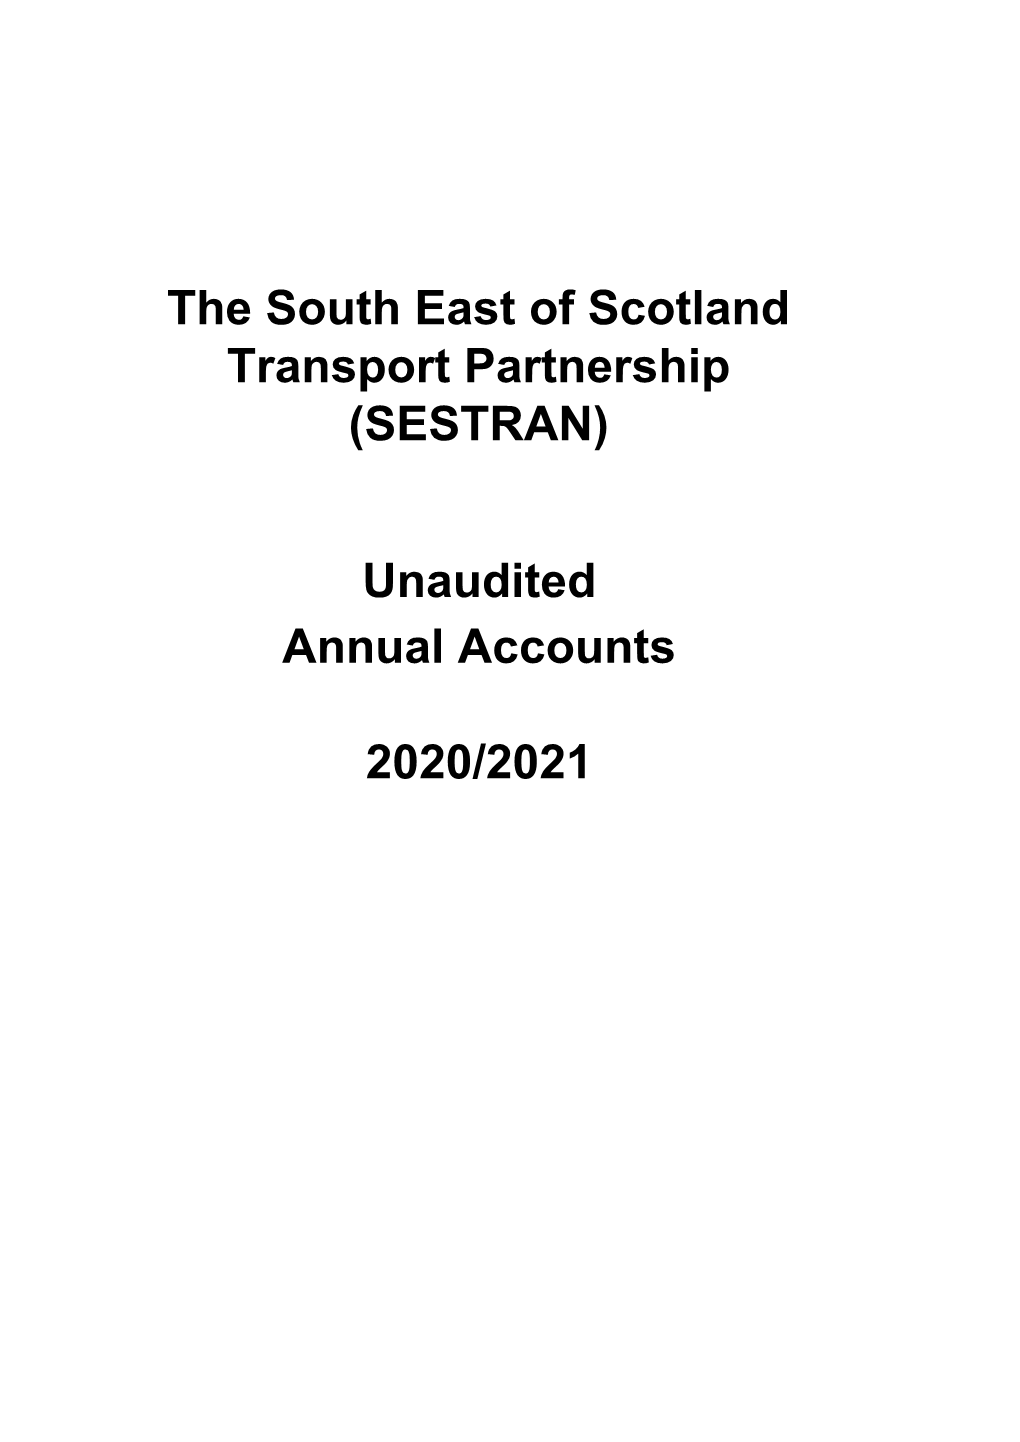 The South East of Scotland Transport Partnership (SESTRAN) Annual